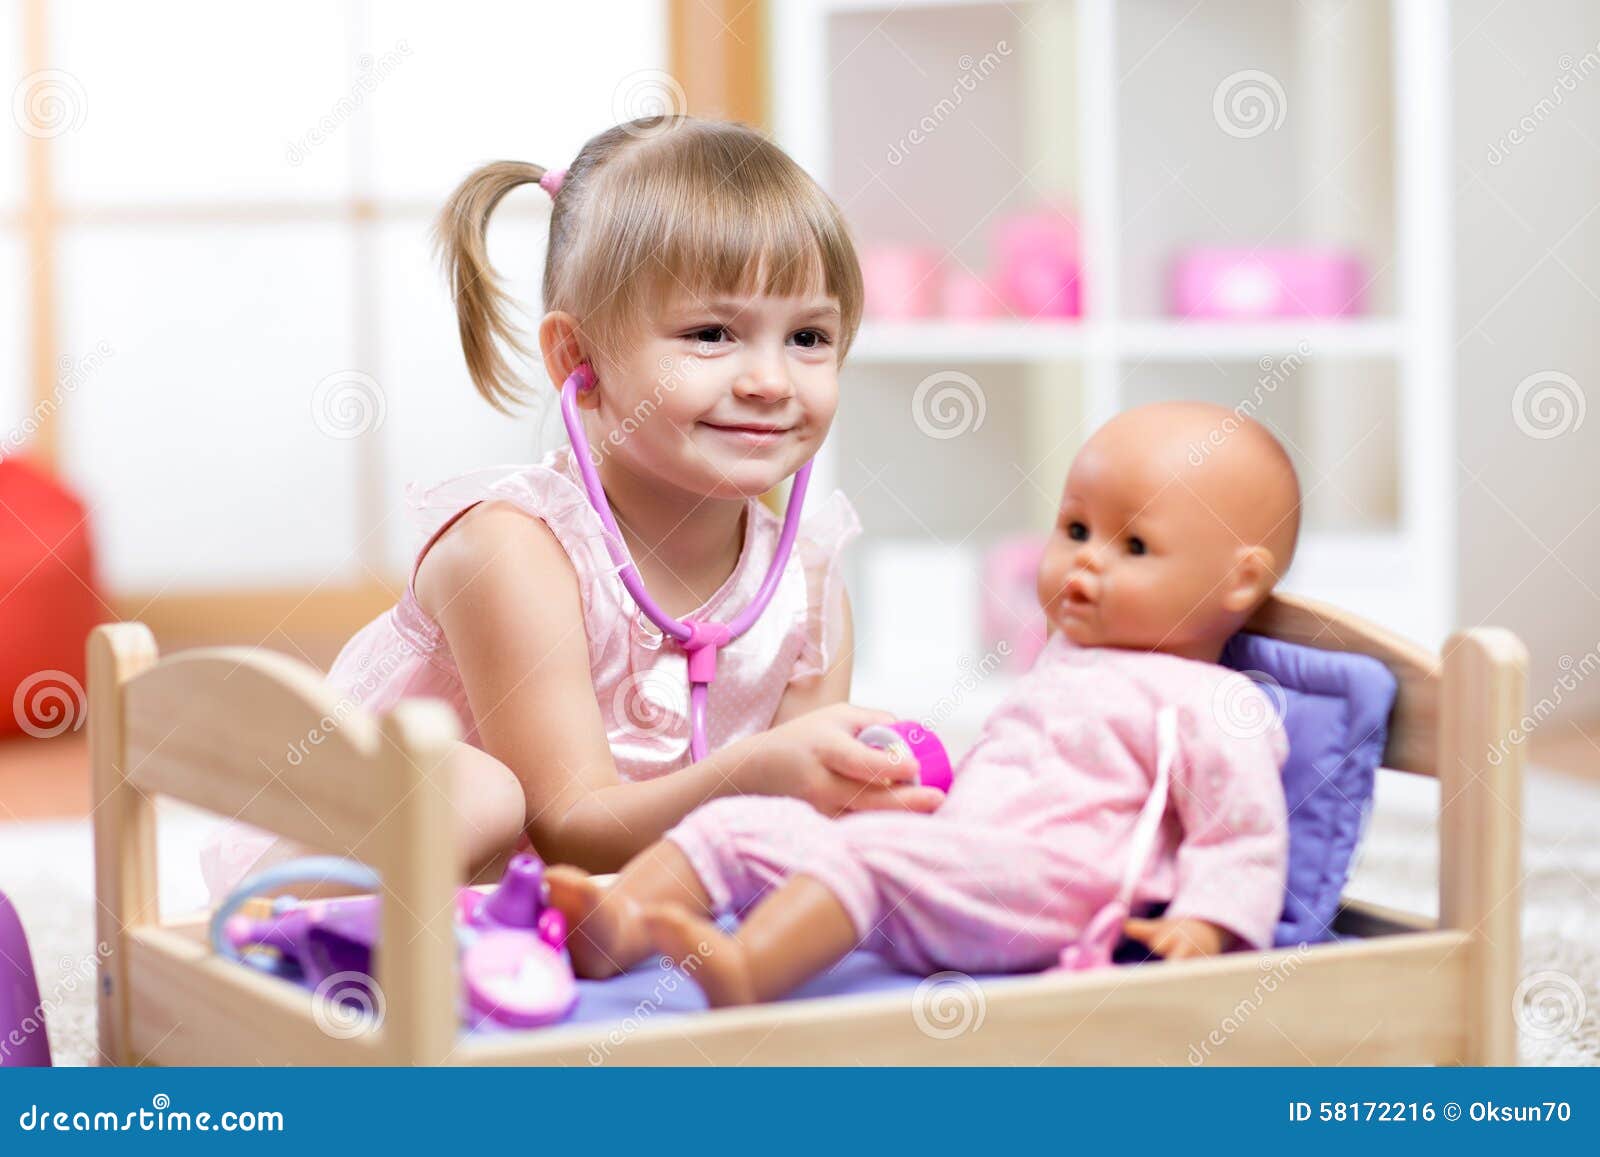 child playing doctor with doll toy